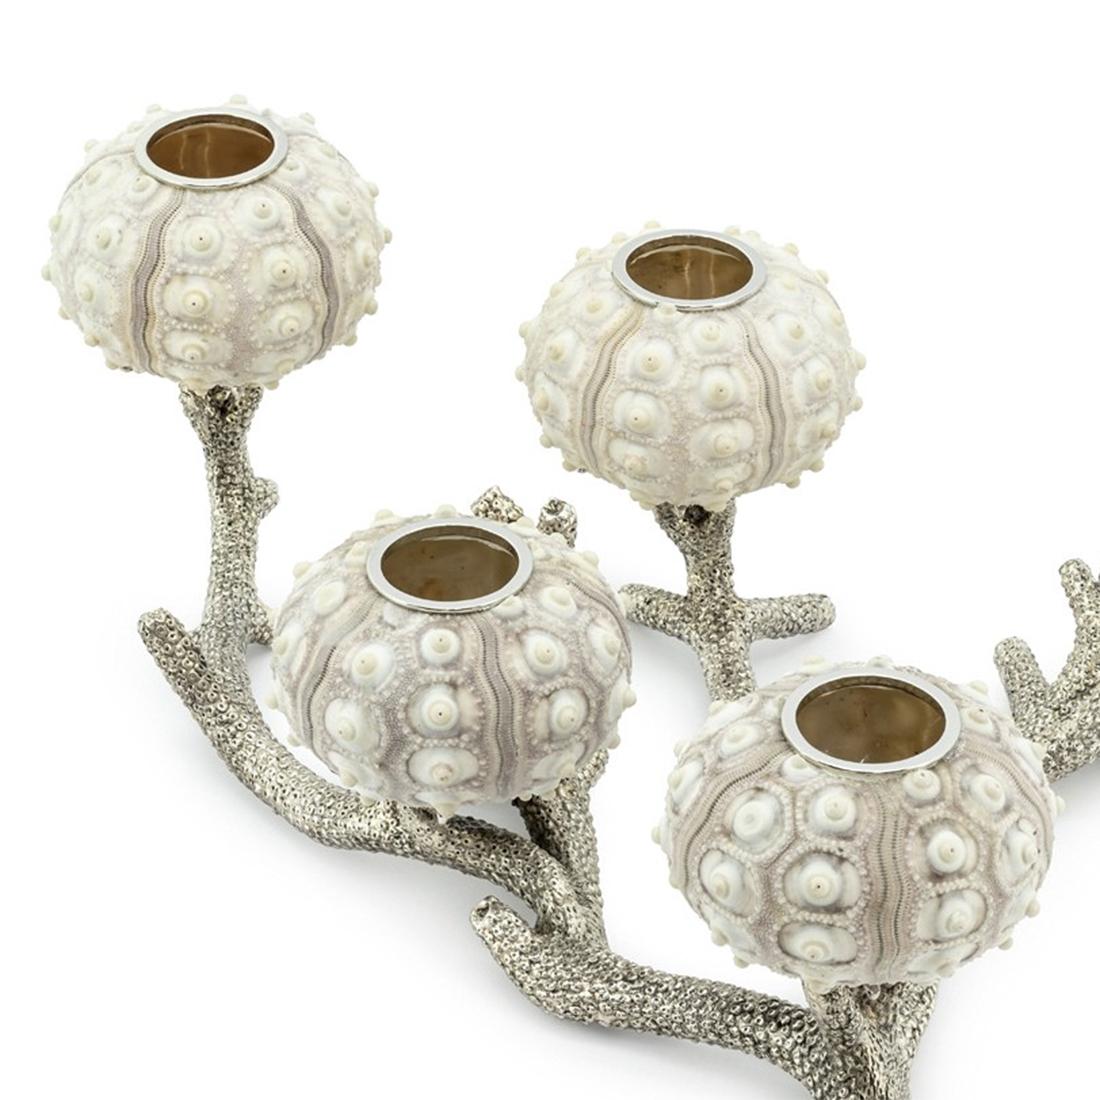 Candleholder Urchin with silver plated coral metal 
structure and with 5 candleholders urchin shells.